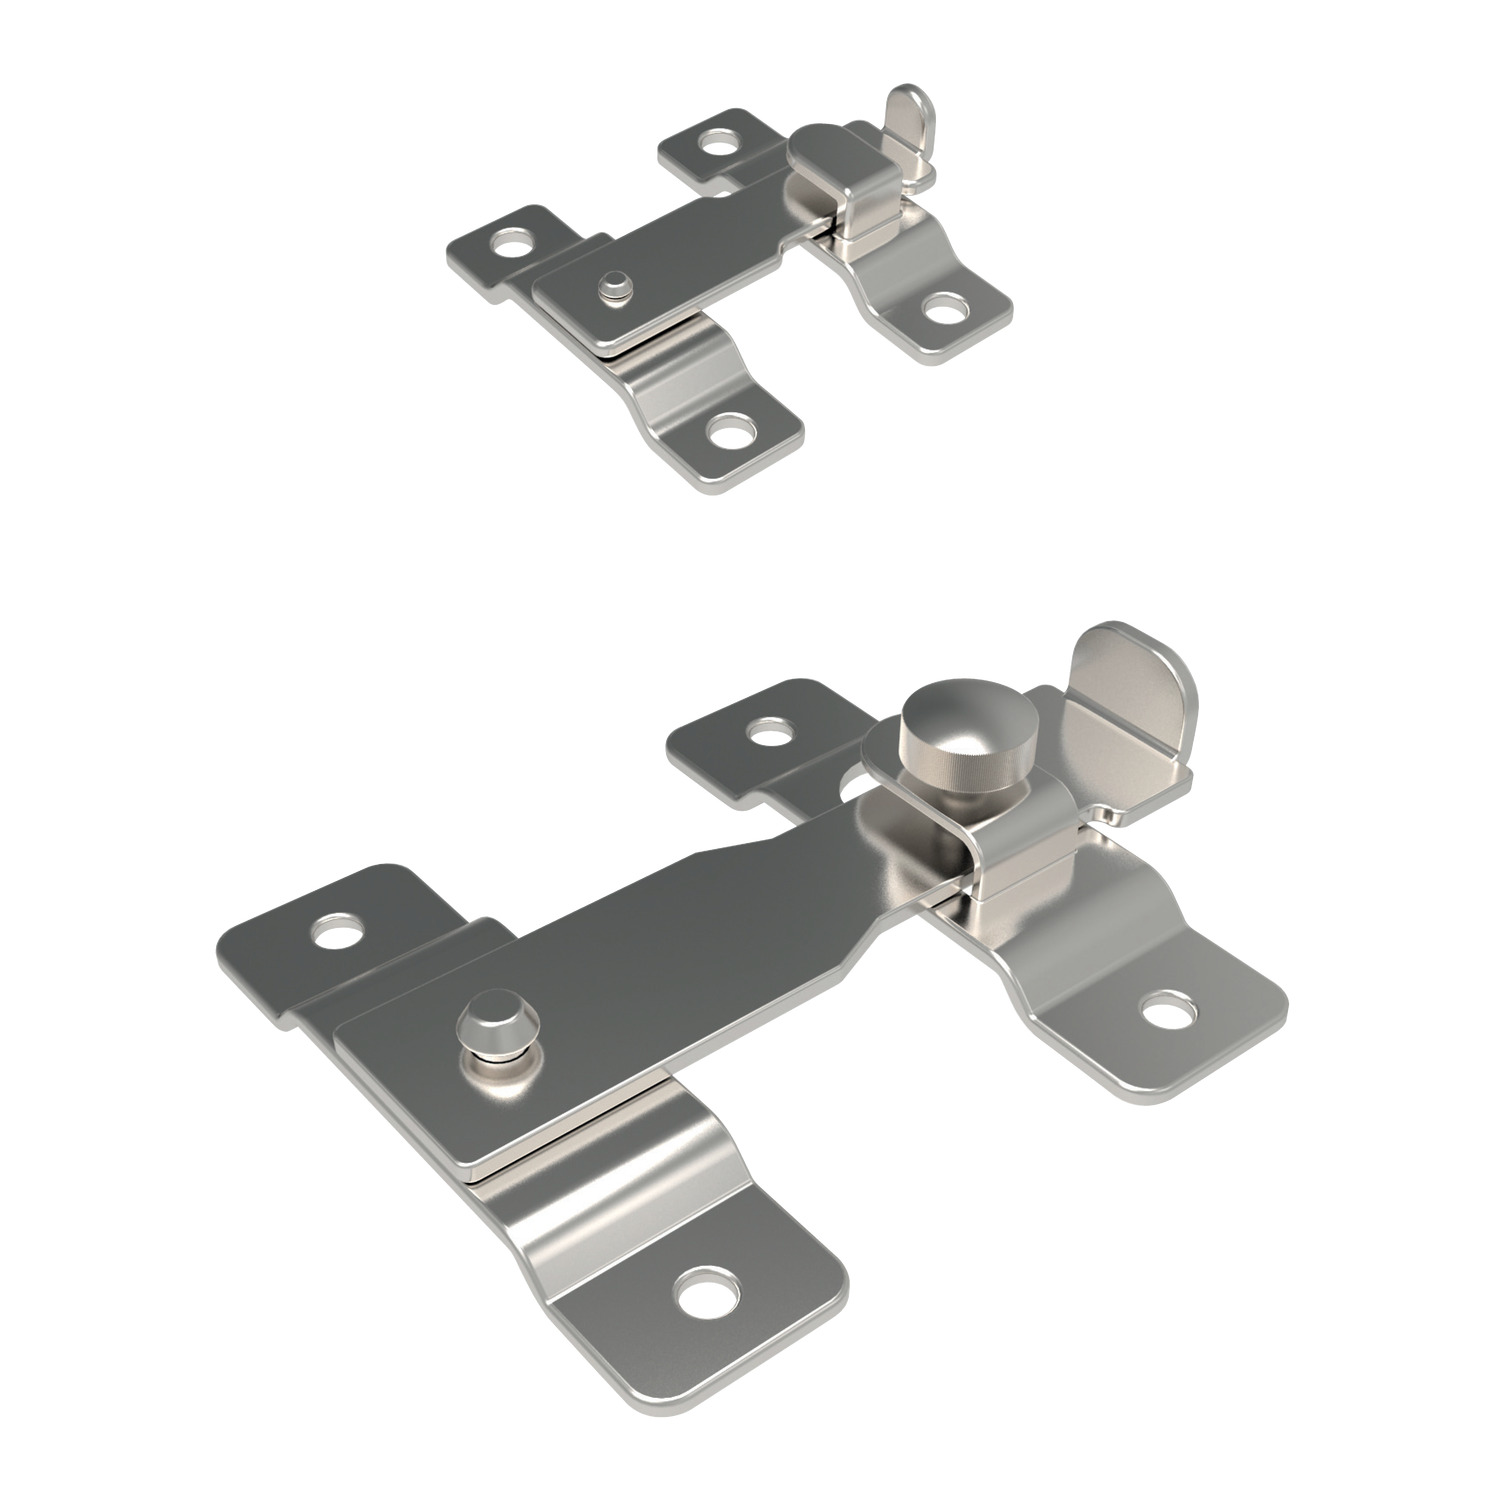 J6220.AC0045 Bar Latches Stainless Steel With thumb screw. 45 x 40